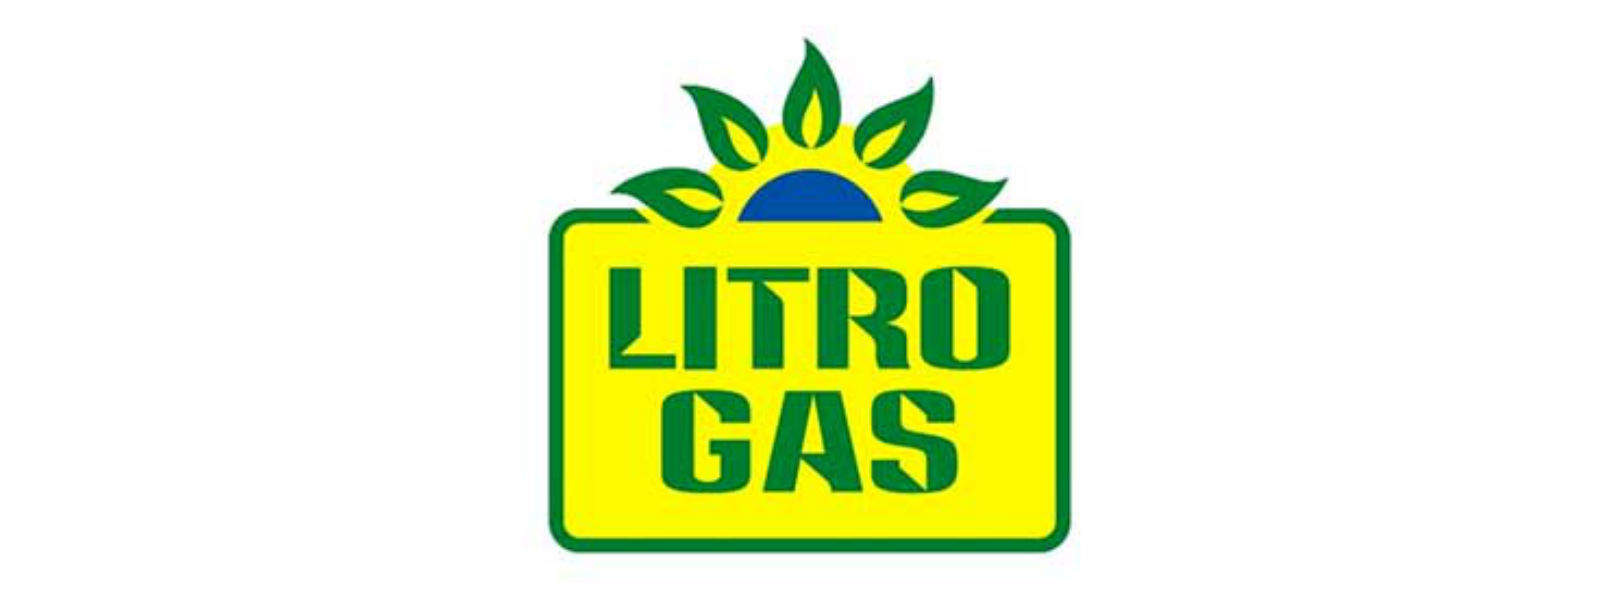 Movement to protect Litro Gas alleges conspiracy